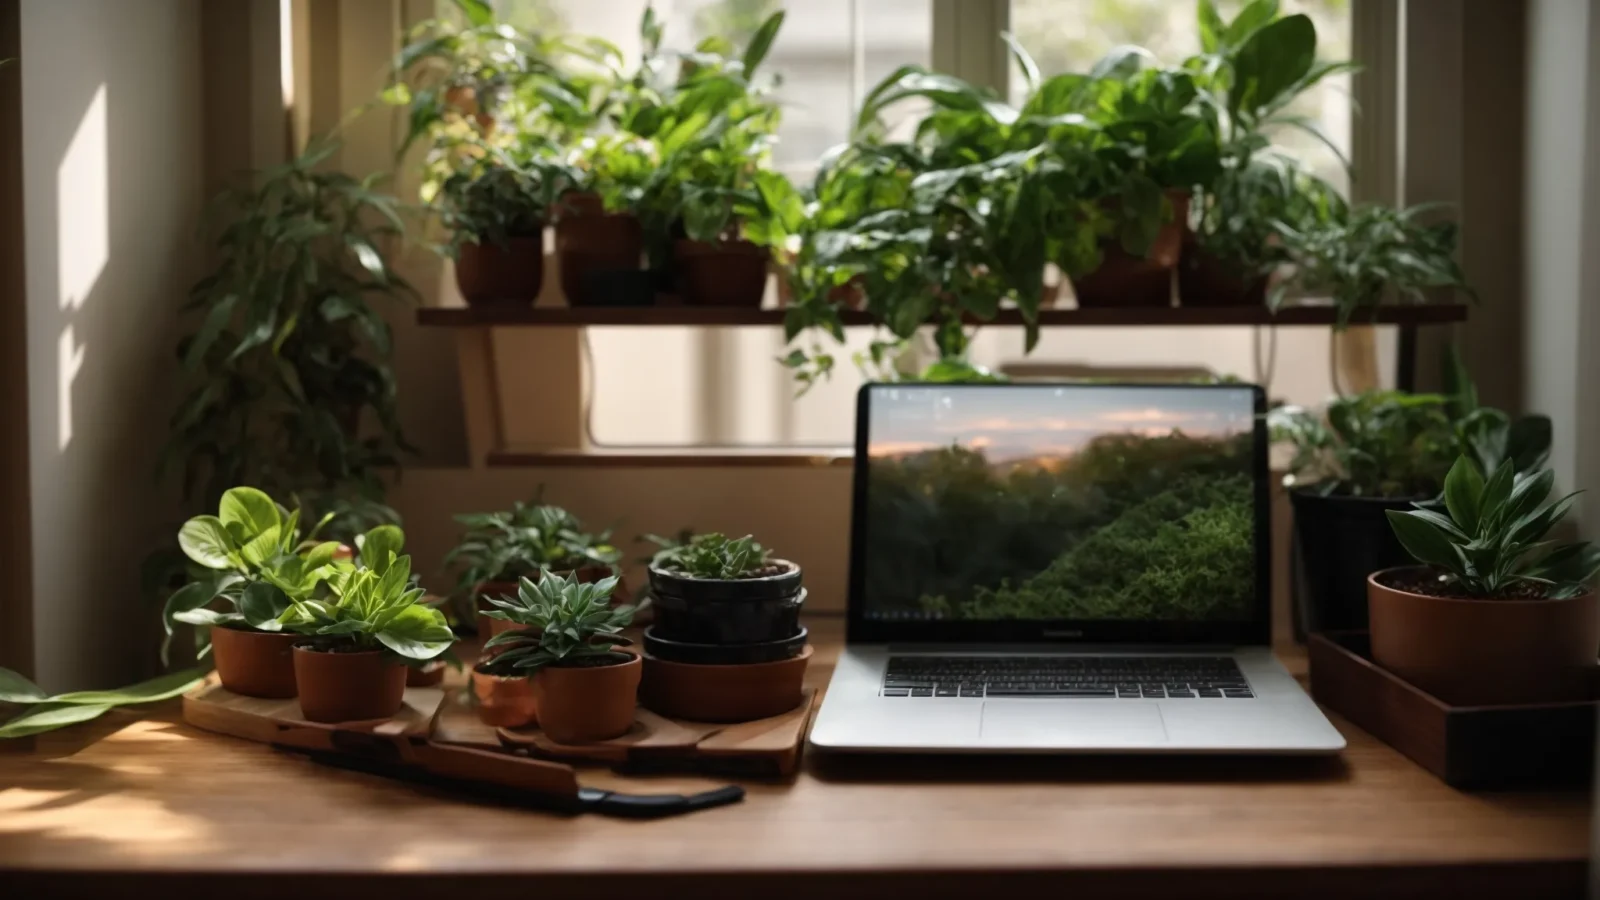 a laptop on an eco-friendly, wooden desk surrounded by potted plants under soft, natural light.